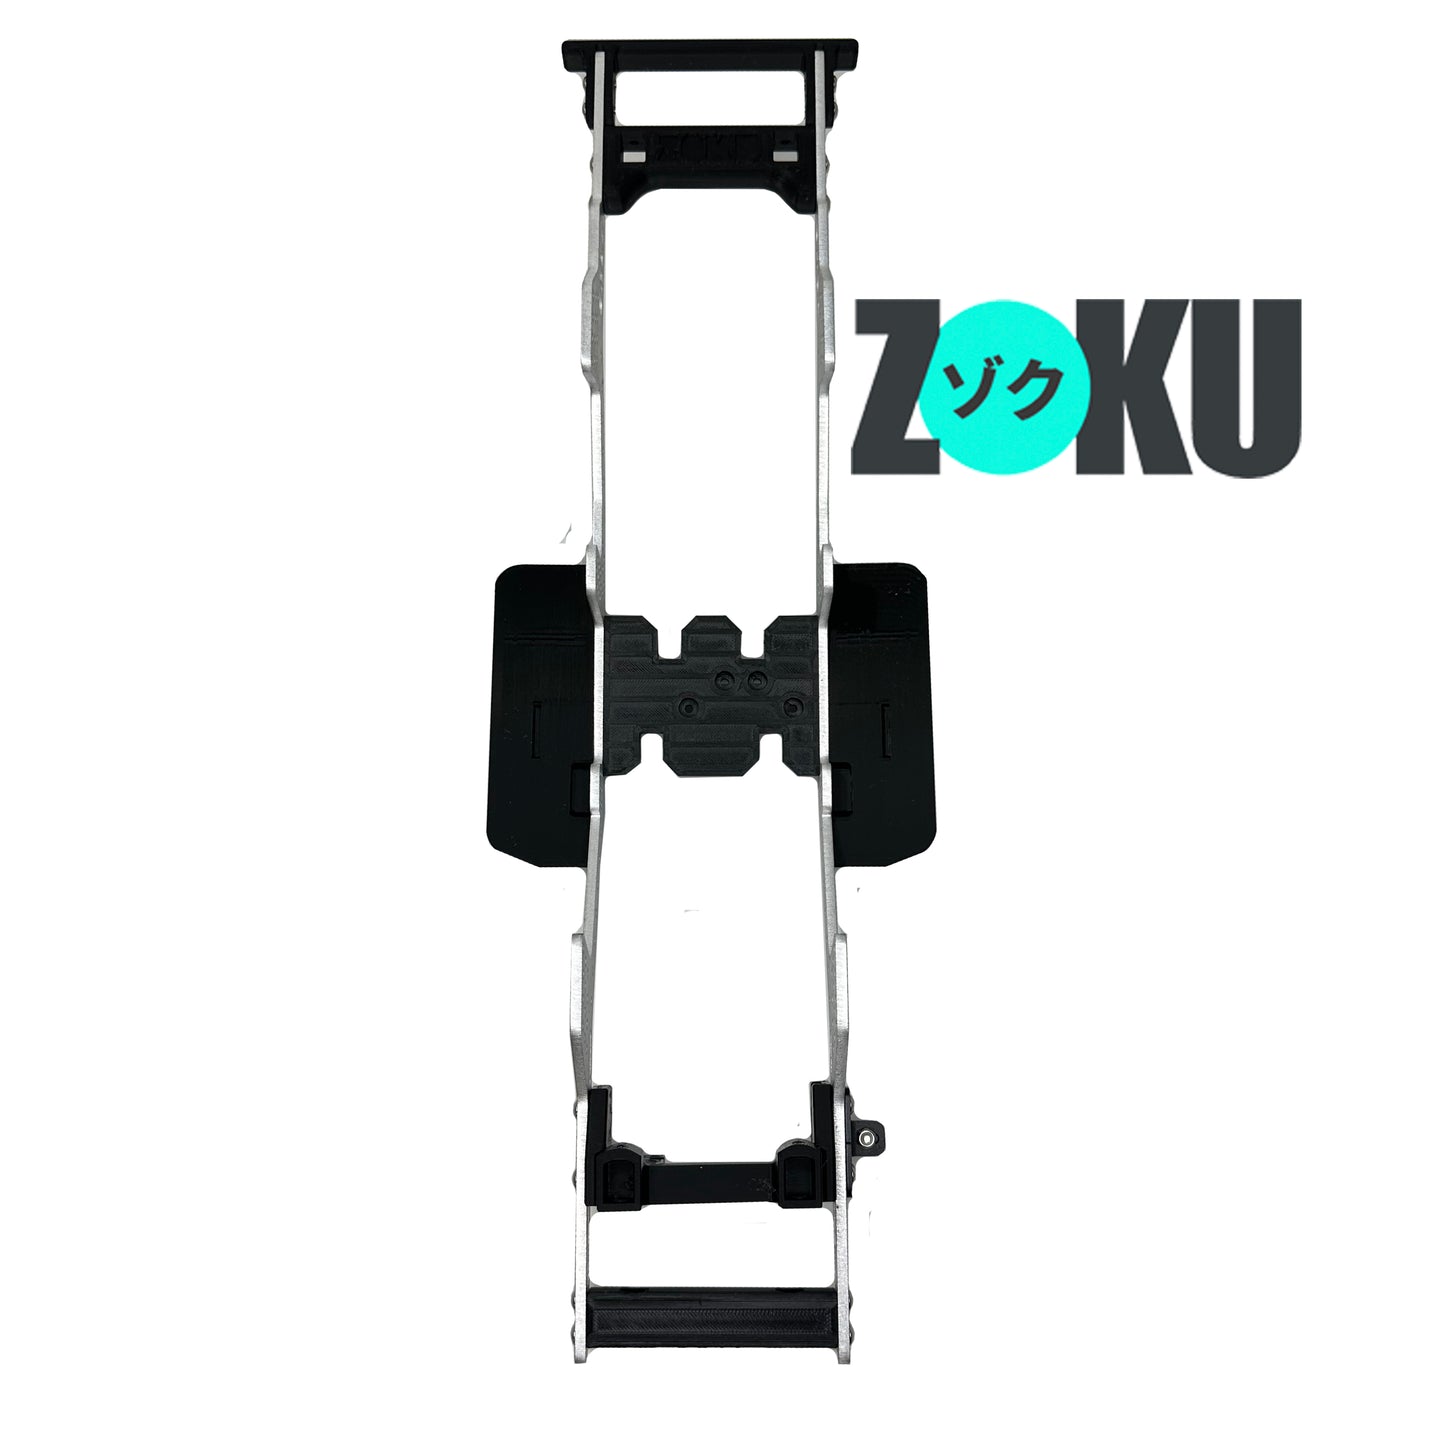 Zoku Chassis for Base Camp